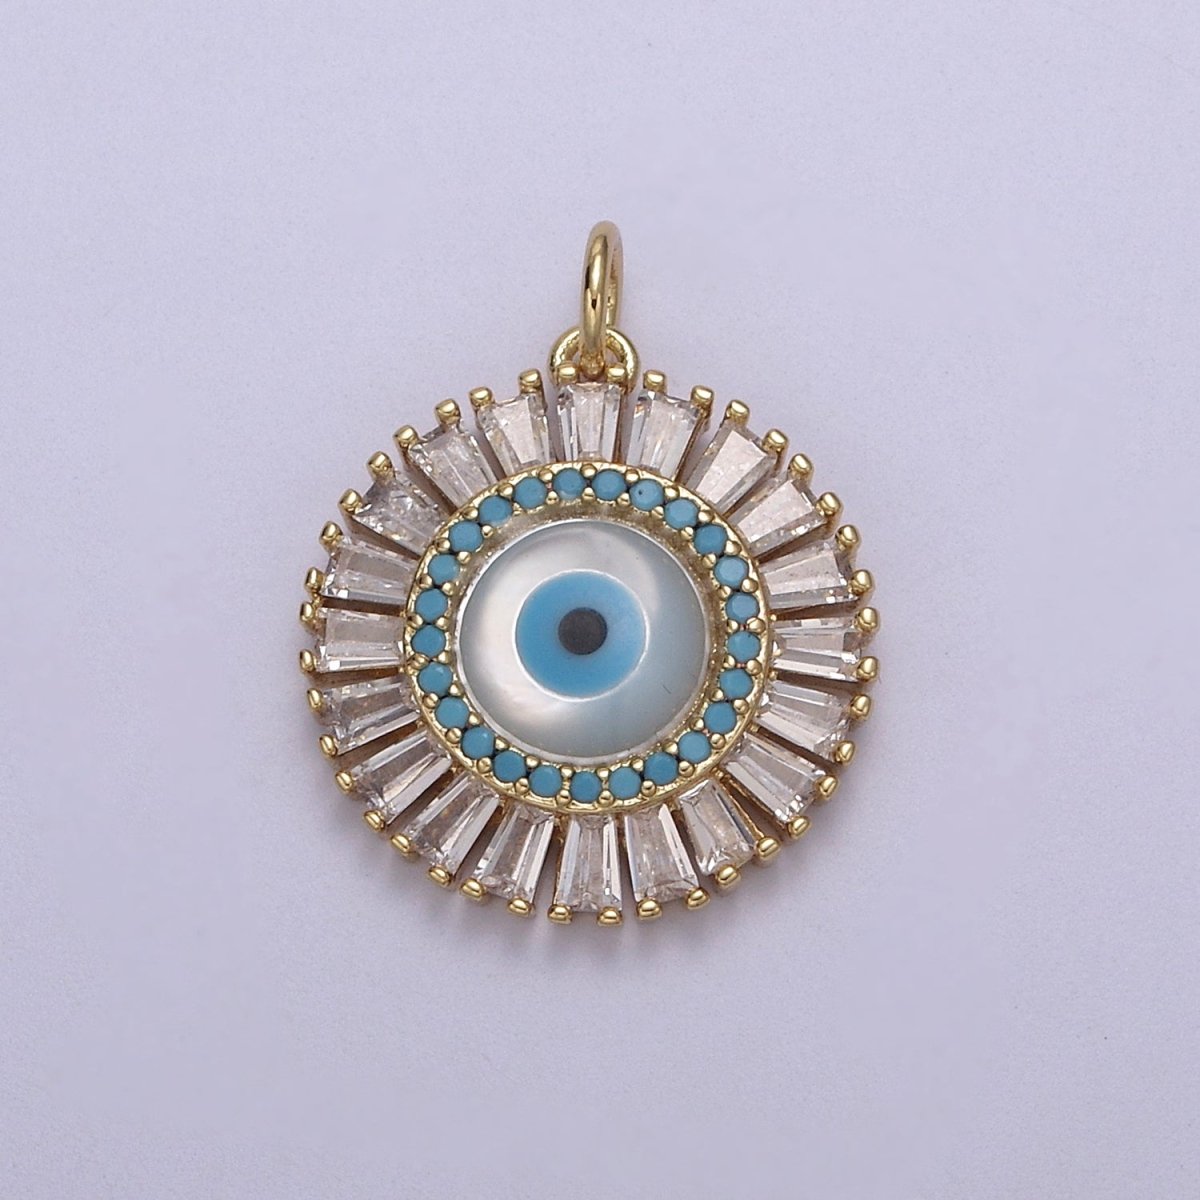 Dainty Gold Filled Baguette CZ Evil Eye Charm Necklace | CZ Round Pendant Amulet Protection Jewelry N-827 - DLUXCA